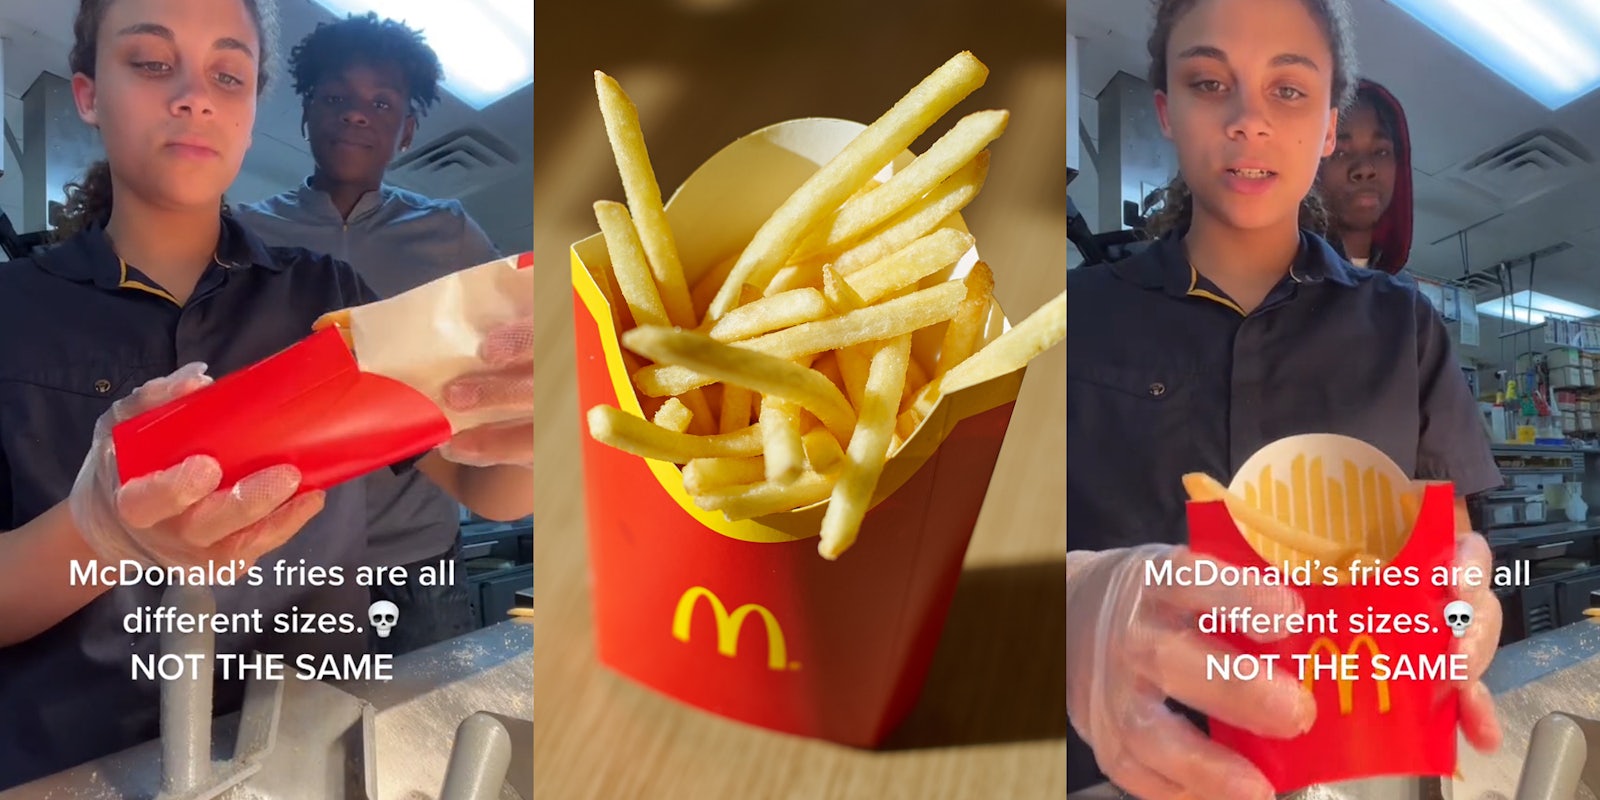 McDonald's employee pouring small fries into medium with caption 'McDonald's fries are all different sizes. NOT THE SAME' (l) McDonald's fries in container on wooden surface (c) McDonald's employee holding medium fries container with small amount of fries inside with caption 'McDonald's fries are all different sizes. NOT THE SAME' (r)